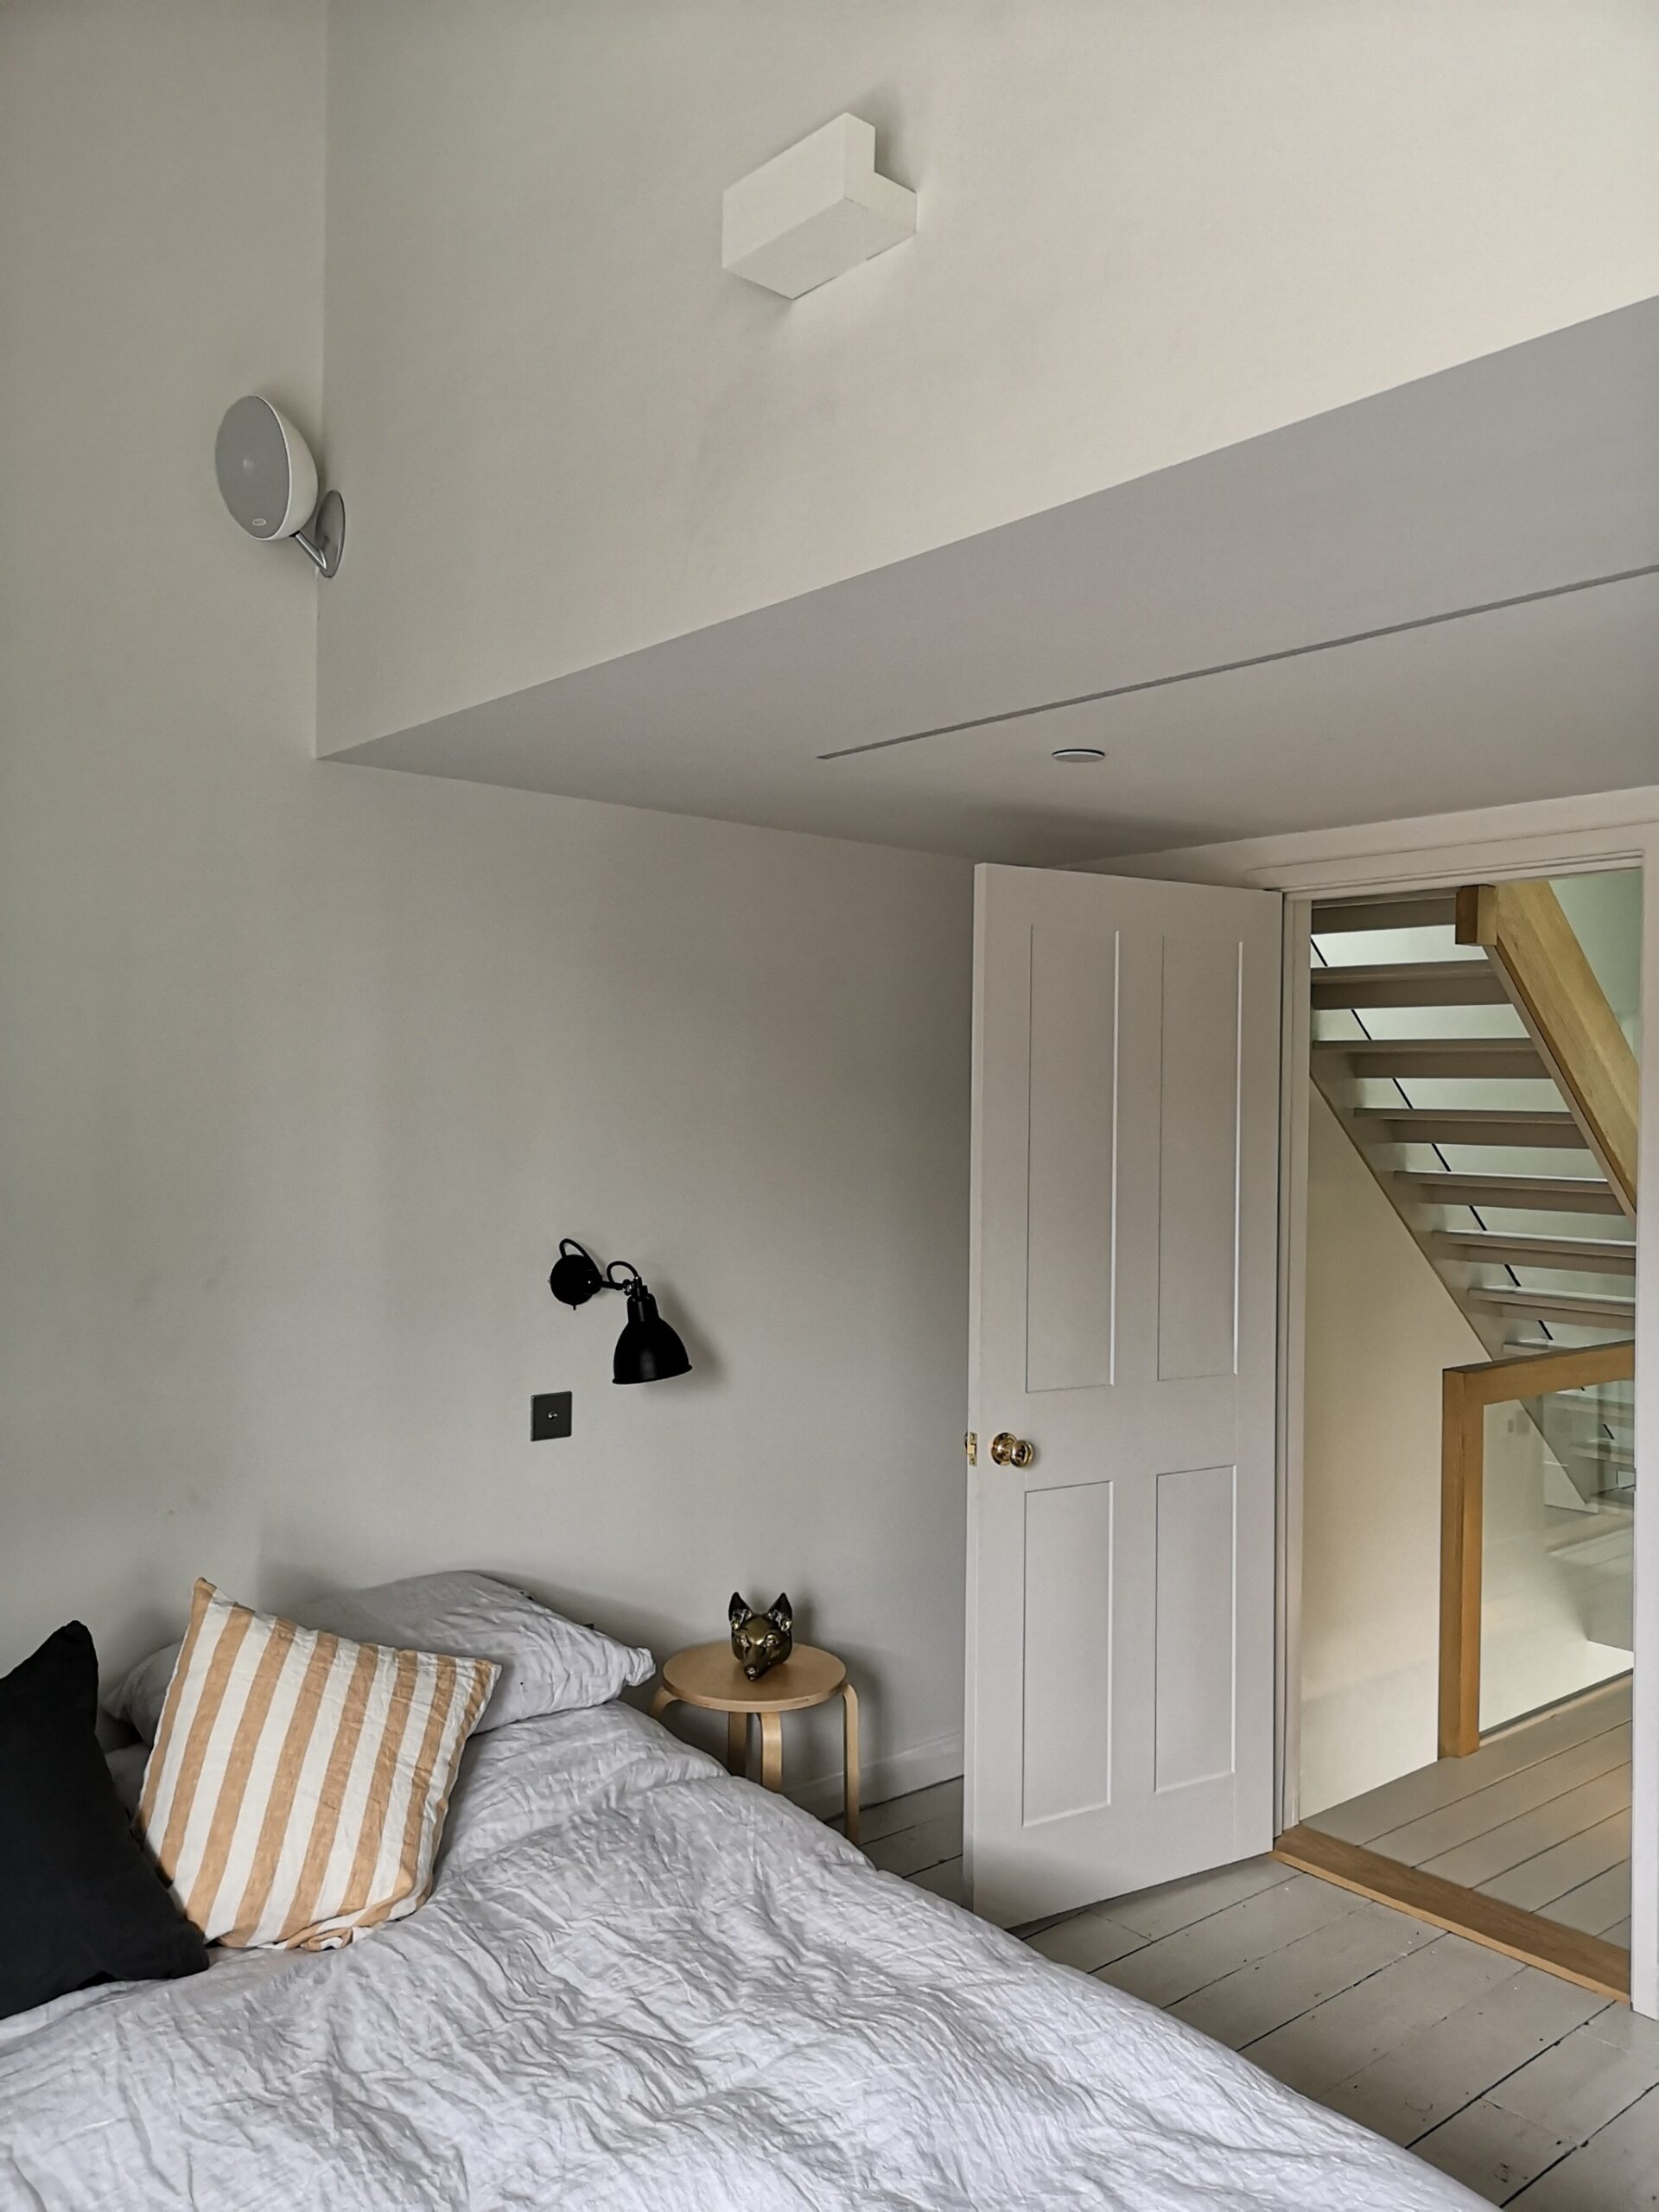 Bedroom with wall mounted speaker above the bed